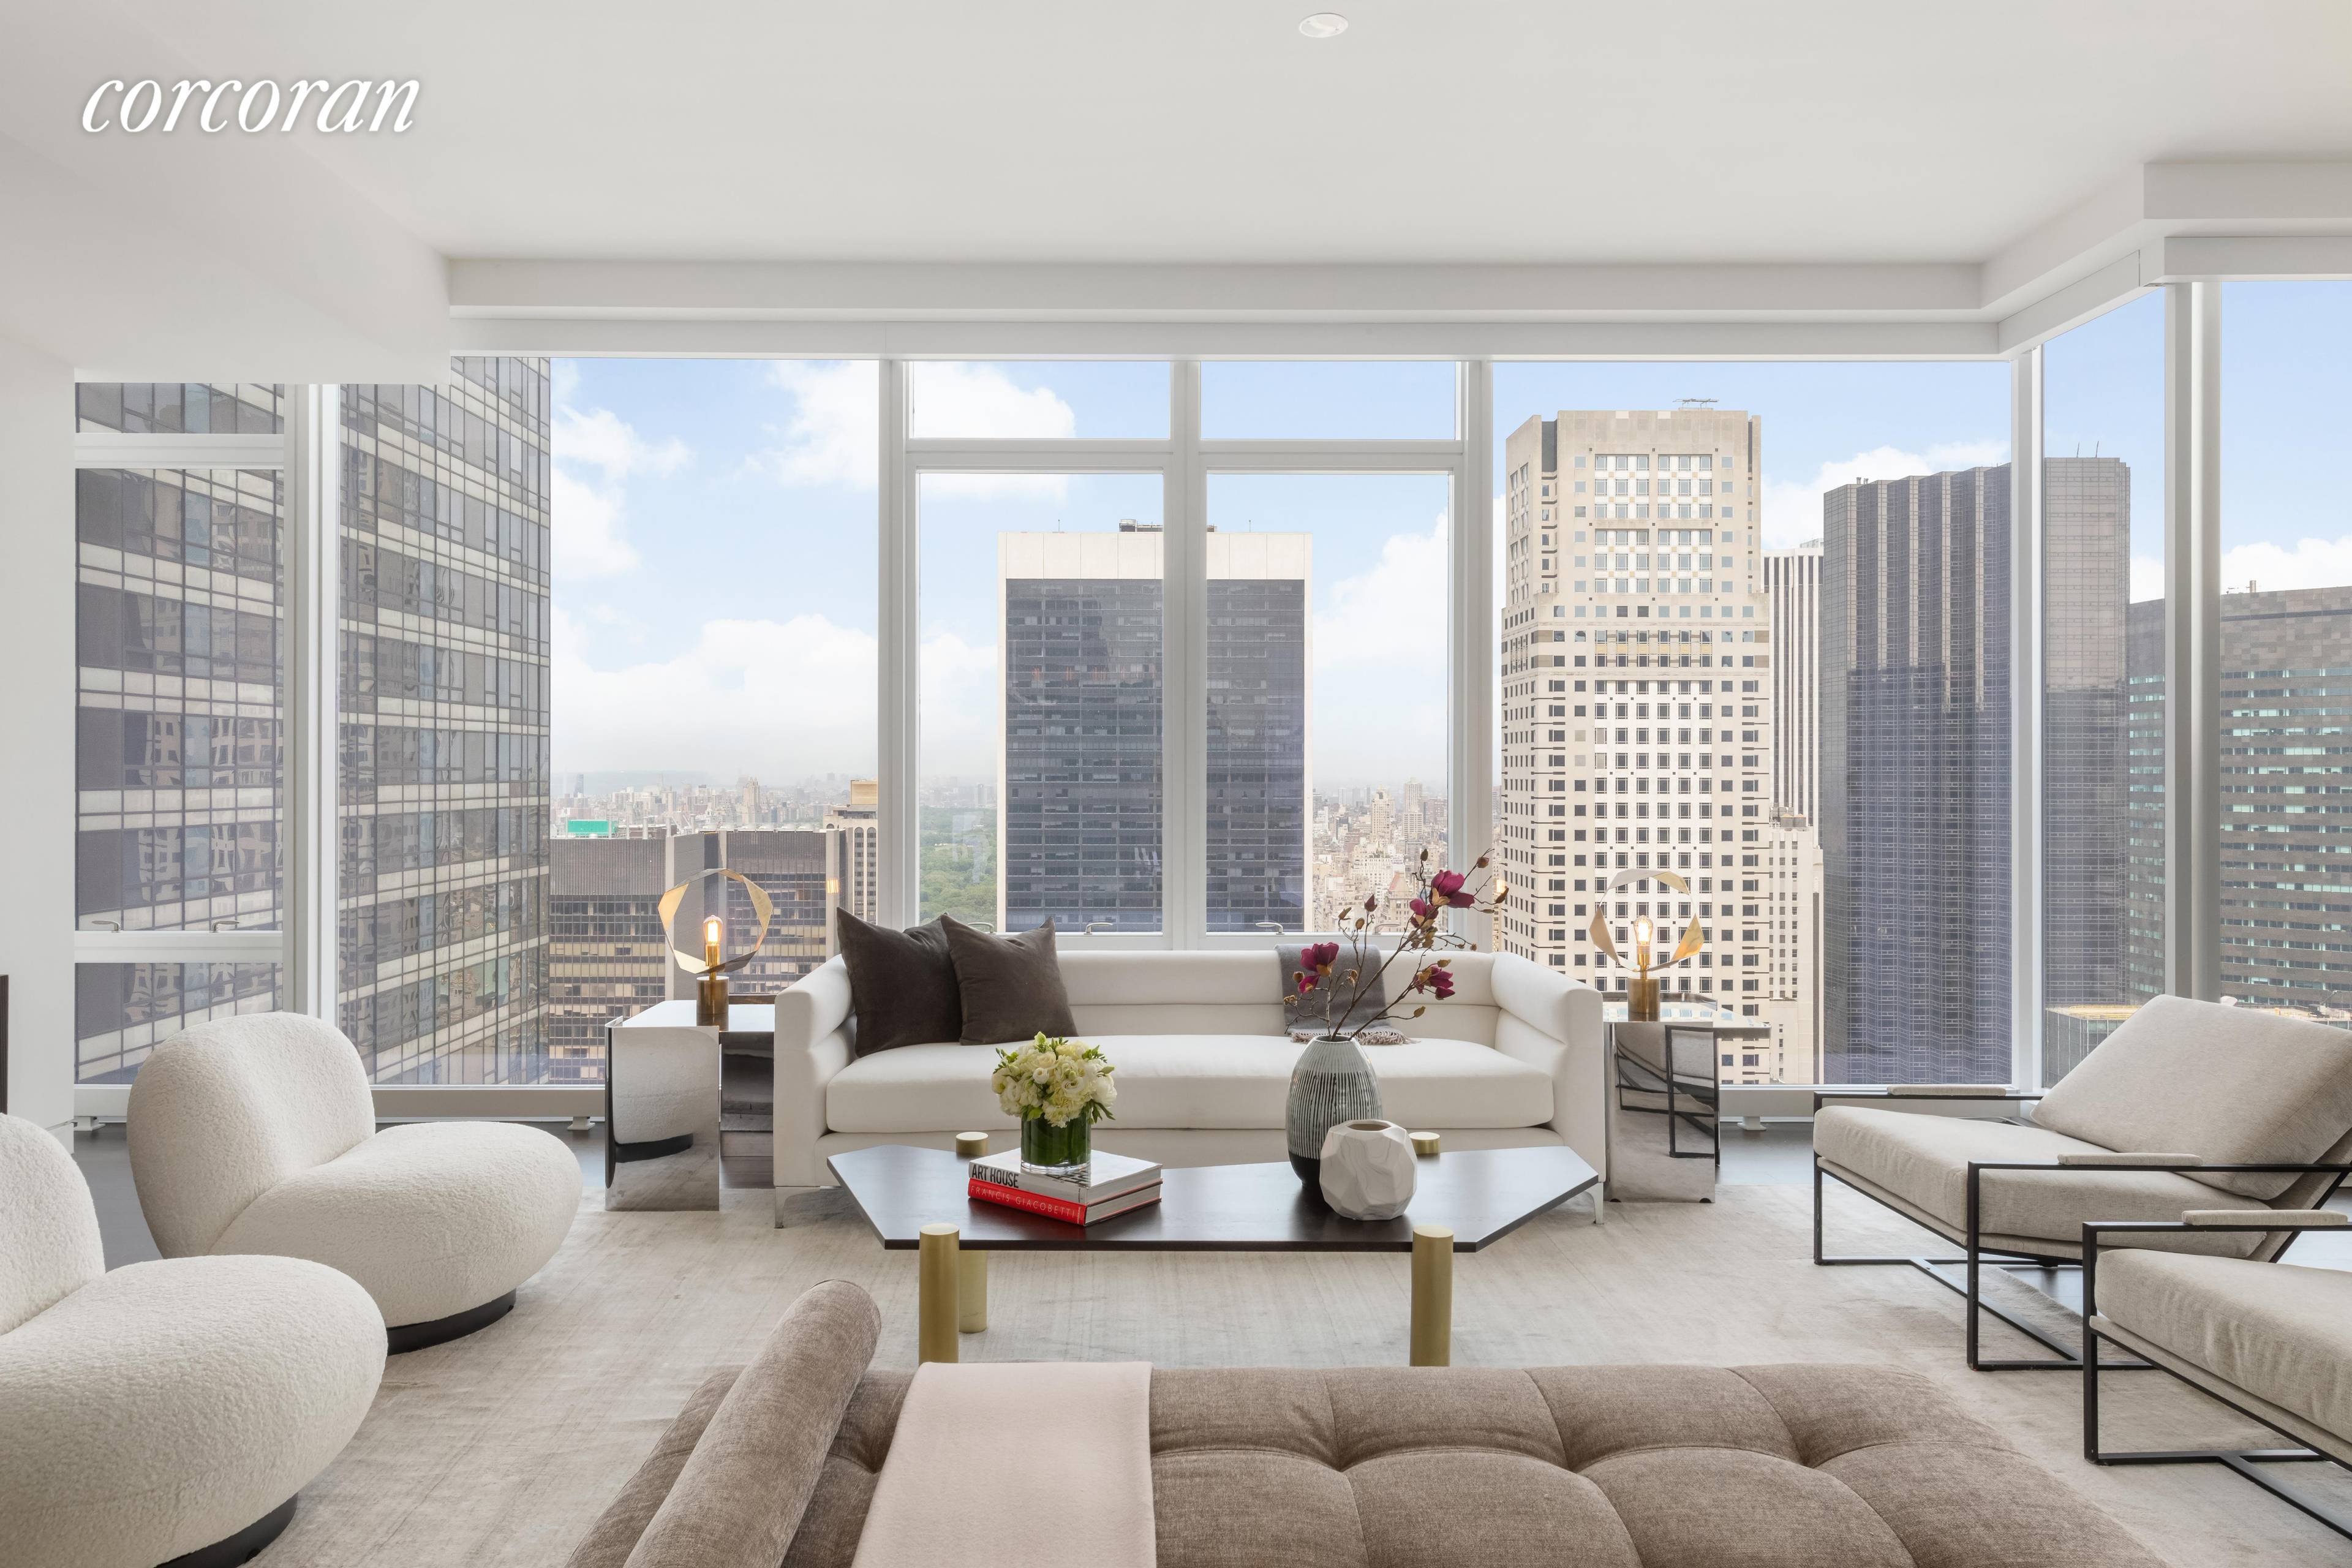 Welcome back to New York City in this magnificent full floor Penthouse.